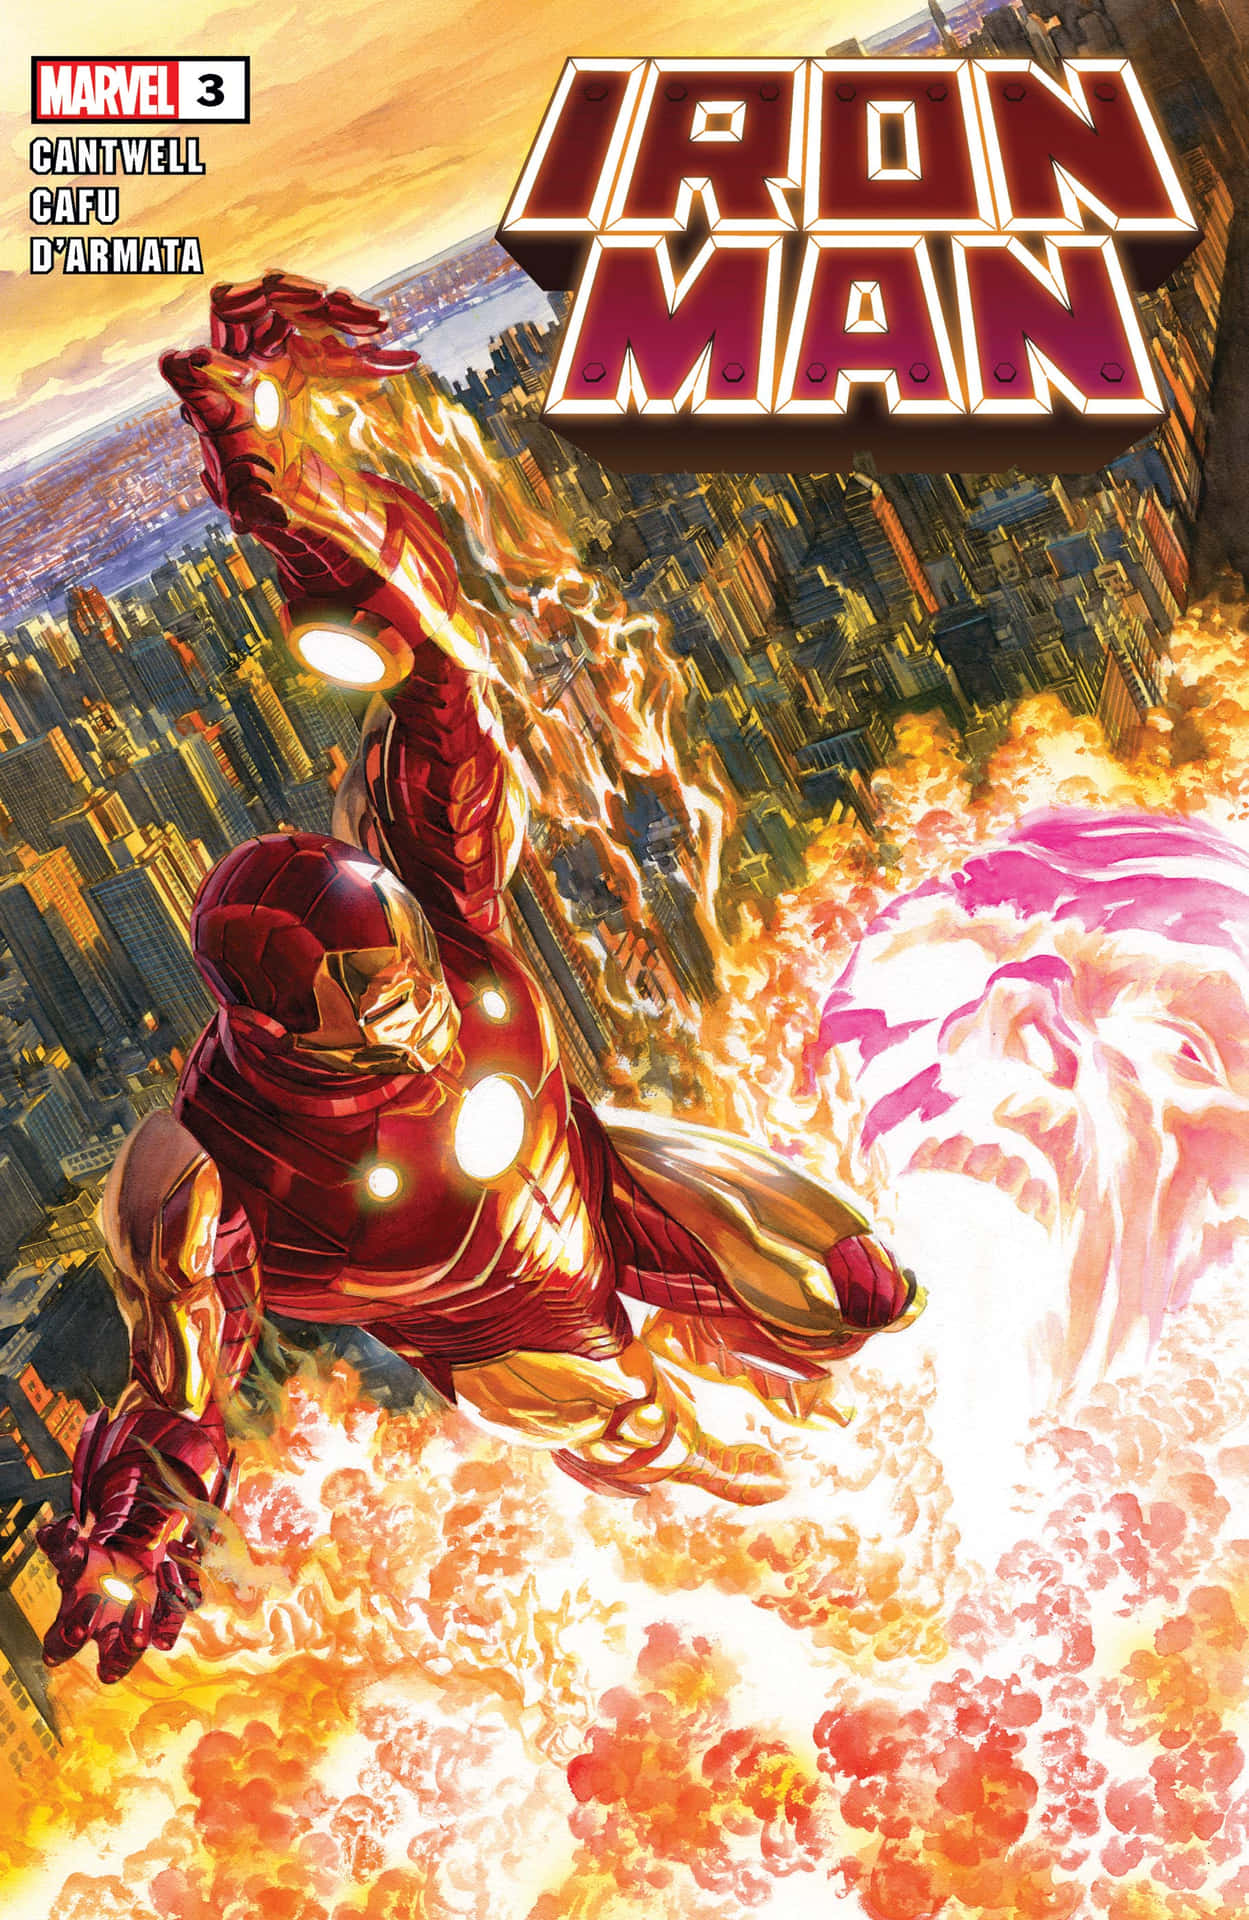 "Iron Man Comics - Stay Informed With Heroics" Wallpaper